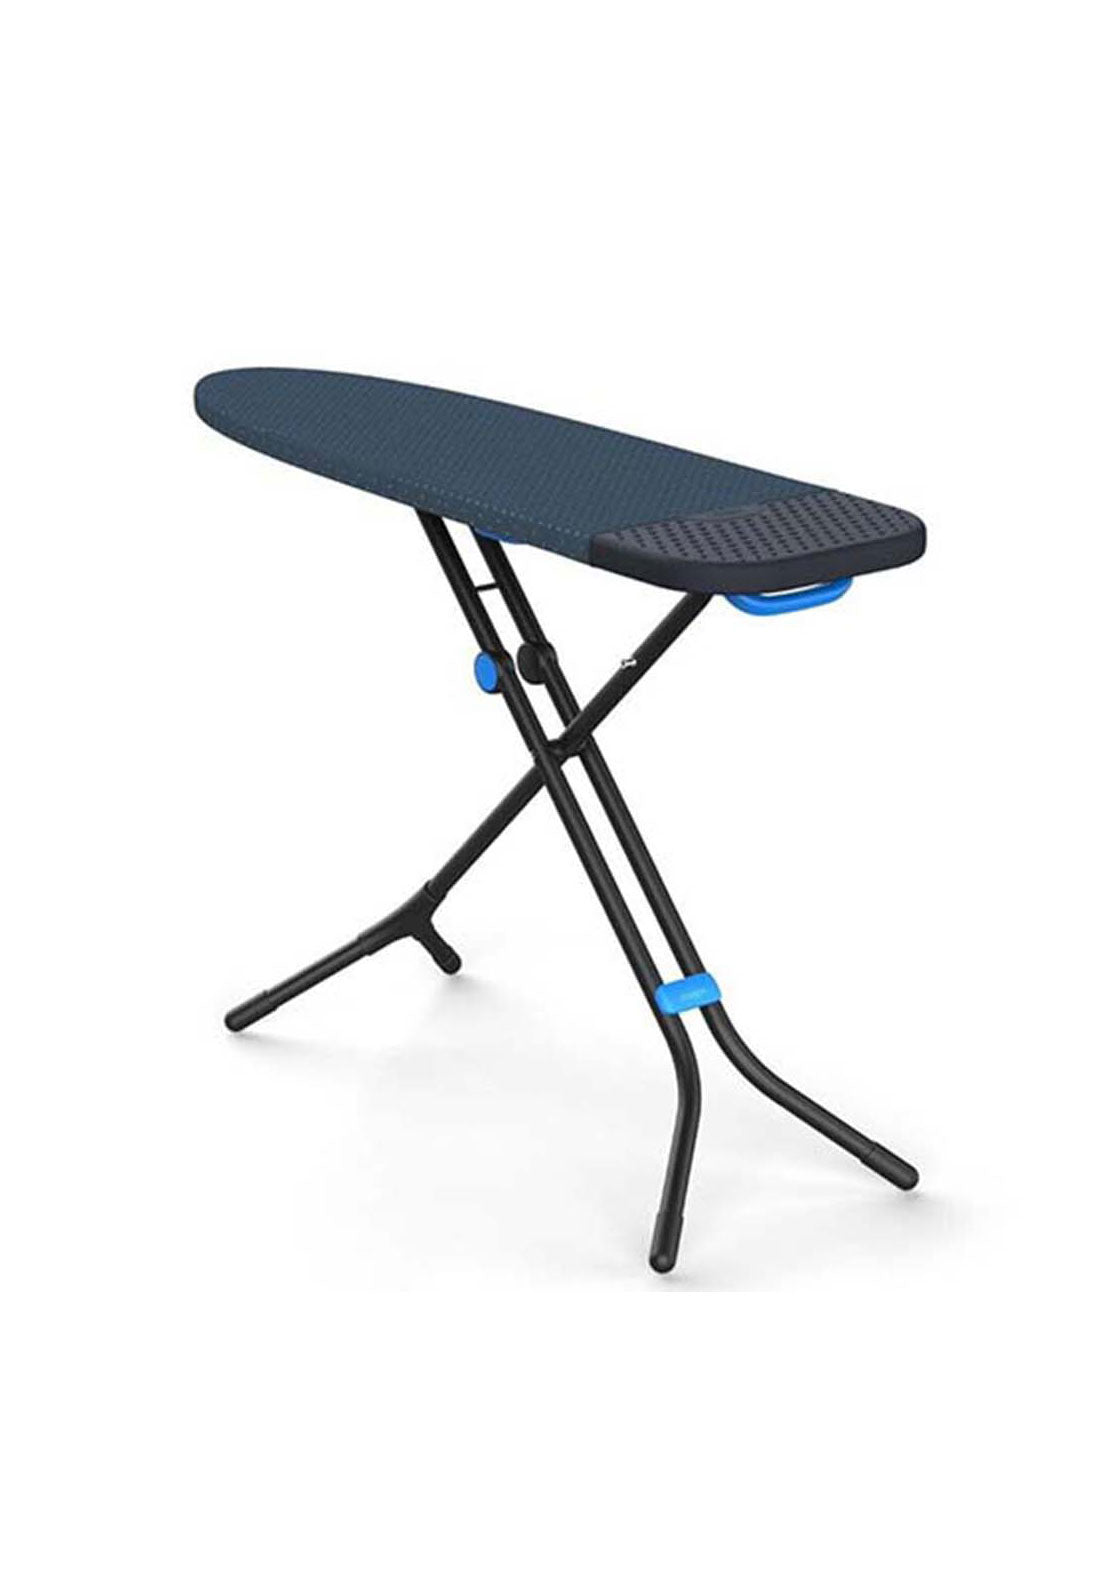 Joseph Joseph Glide Plus Easy Store Ironing Board With Cover | 50006JJ 1 Shaws Department Stores